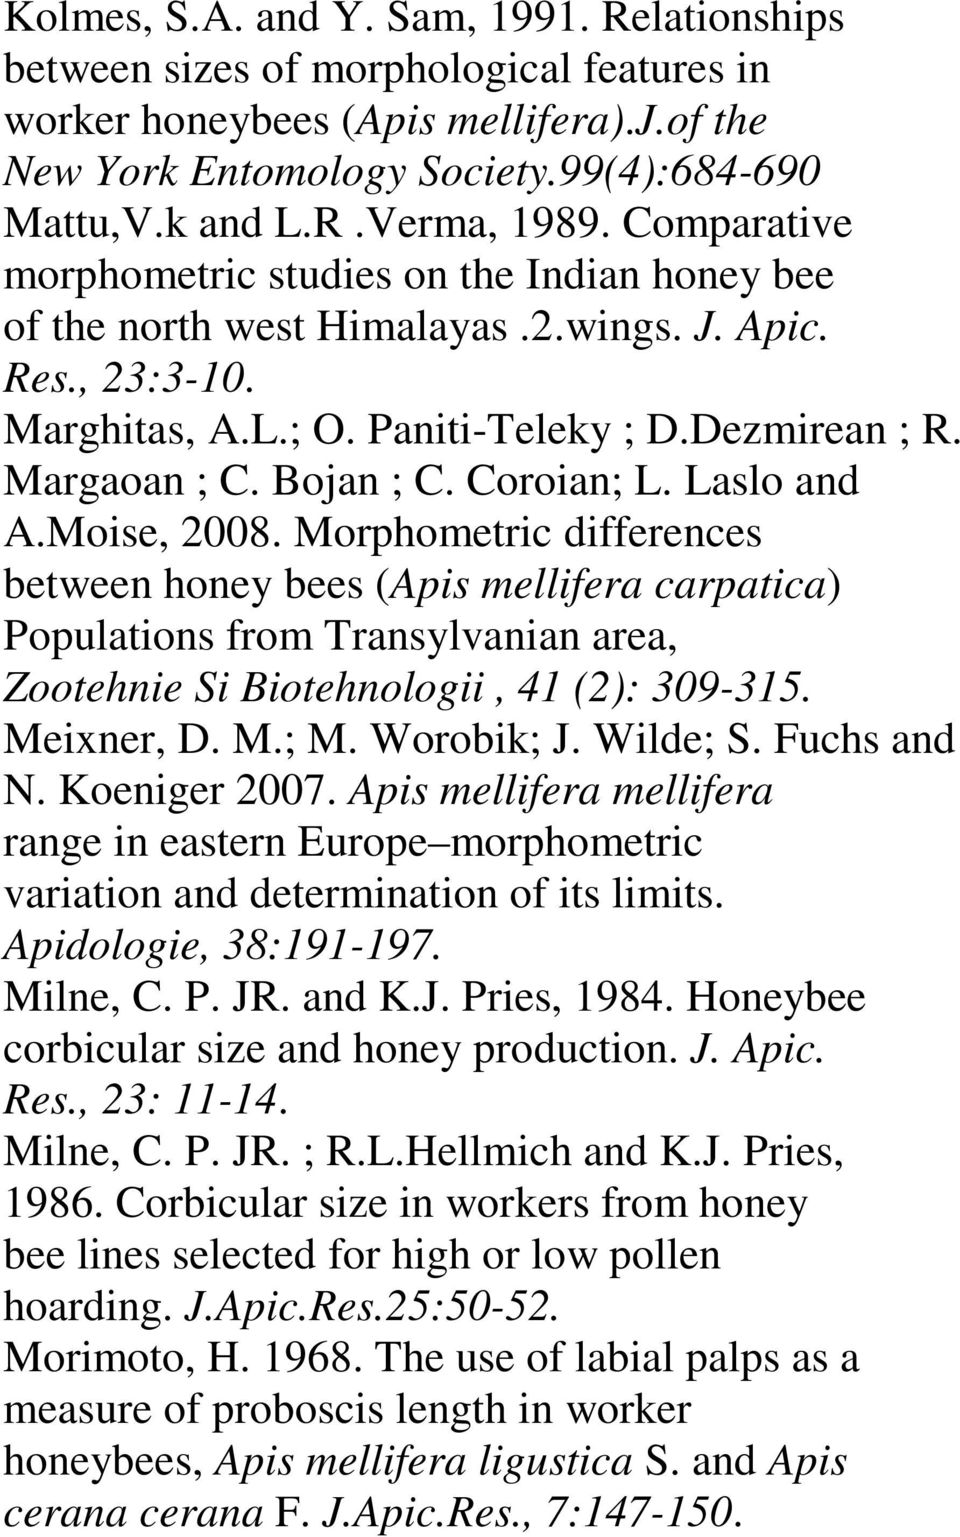 Coroian; L. Laslo and A.Moise, 2008. Morphometric differences between honey bees (Apis mellifera carpatica) Populations from Transylvanian area, Zootehnie Si Biotehnologii, 41 (2): 309-315.